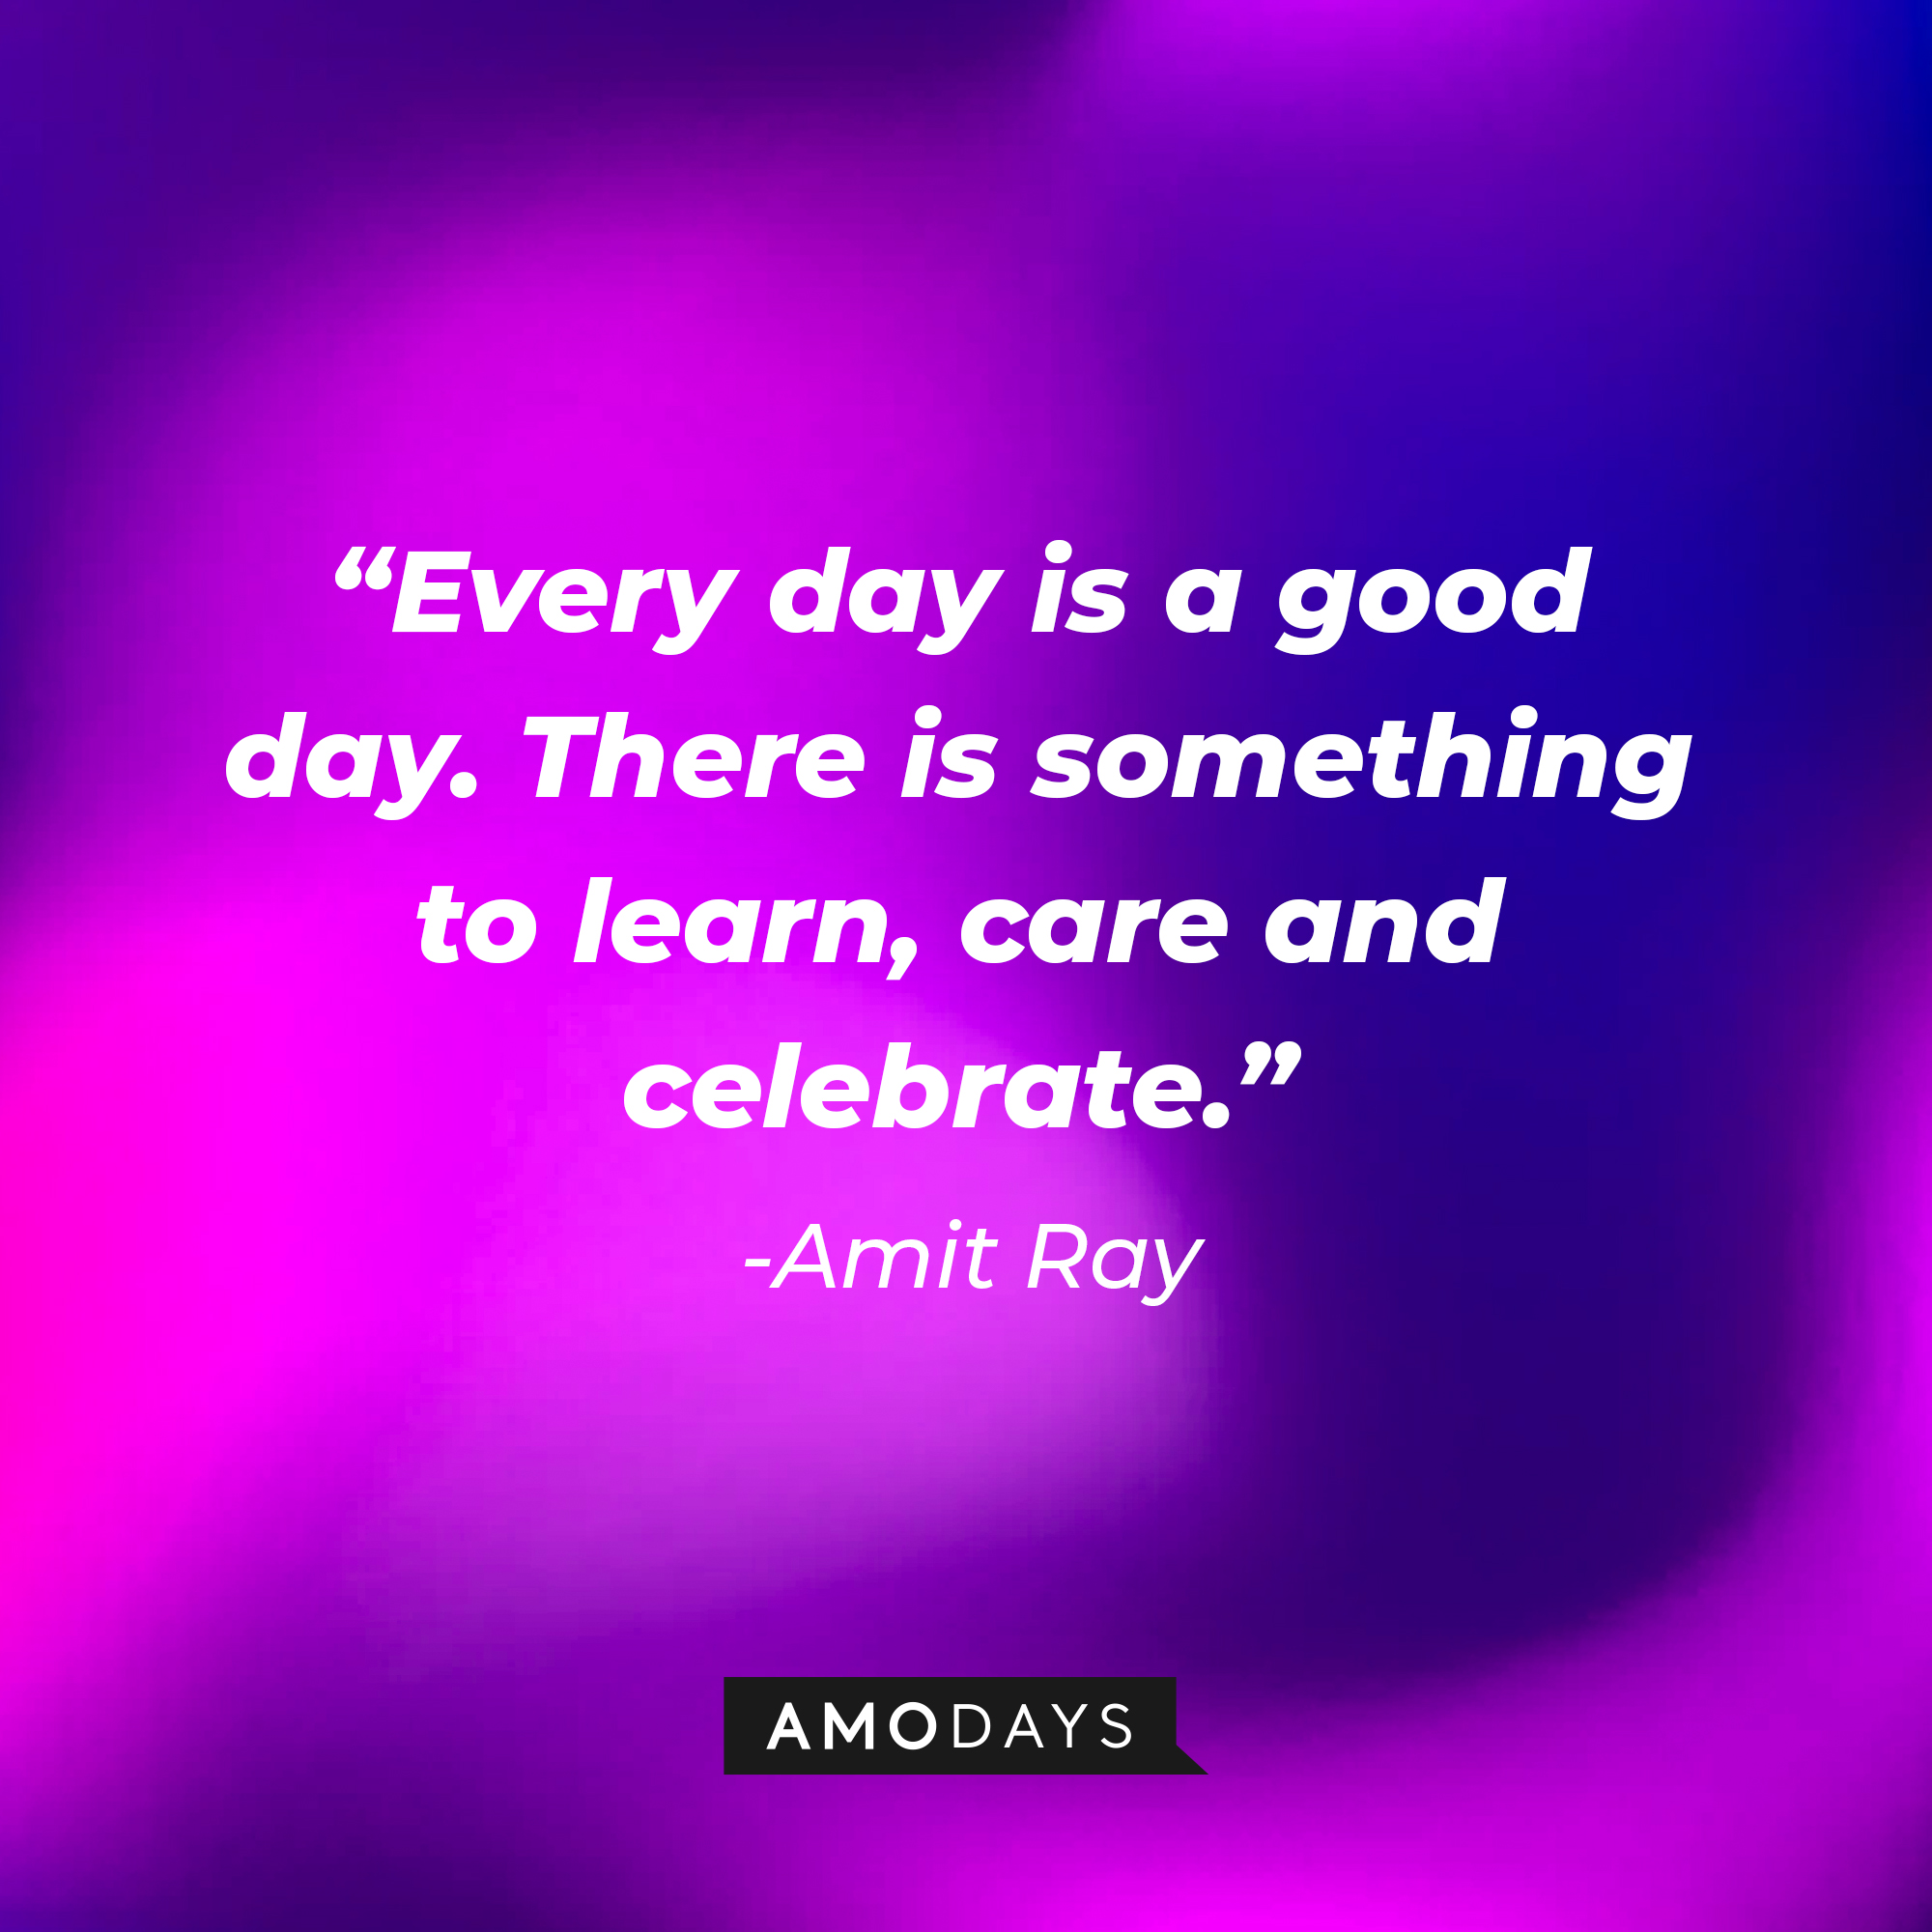 Amit Ray’s quote: "Every day is a good day. There is something to learn, care and celebrate."  | Image: Amodays